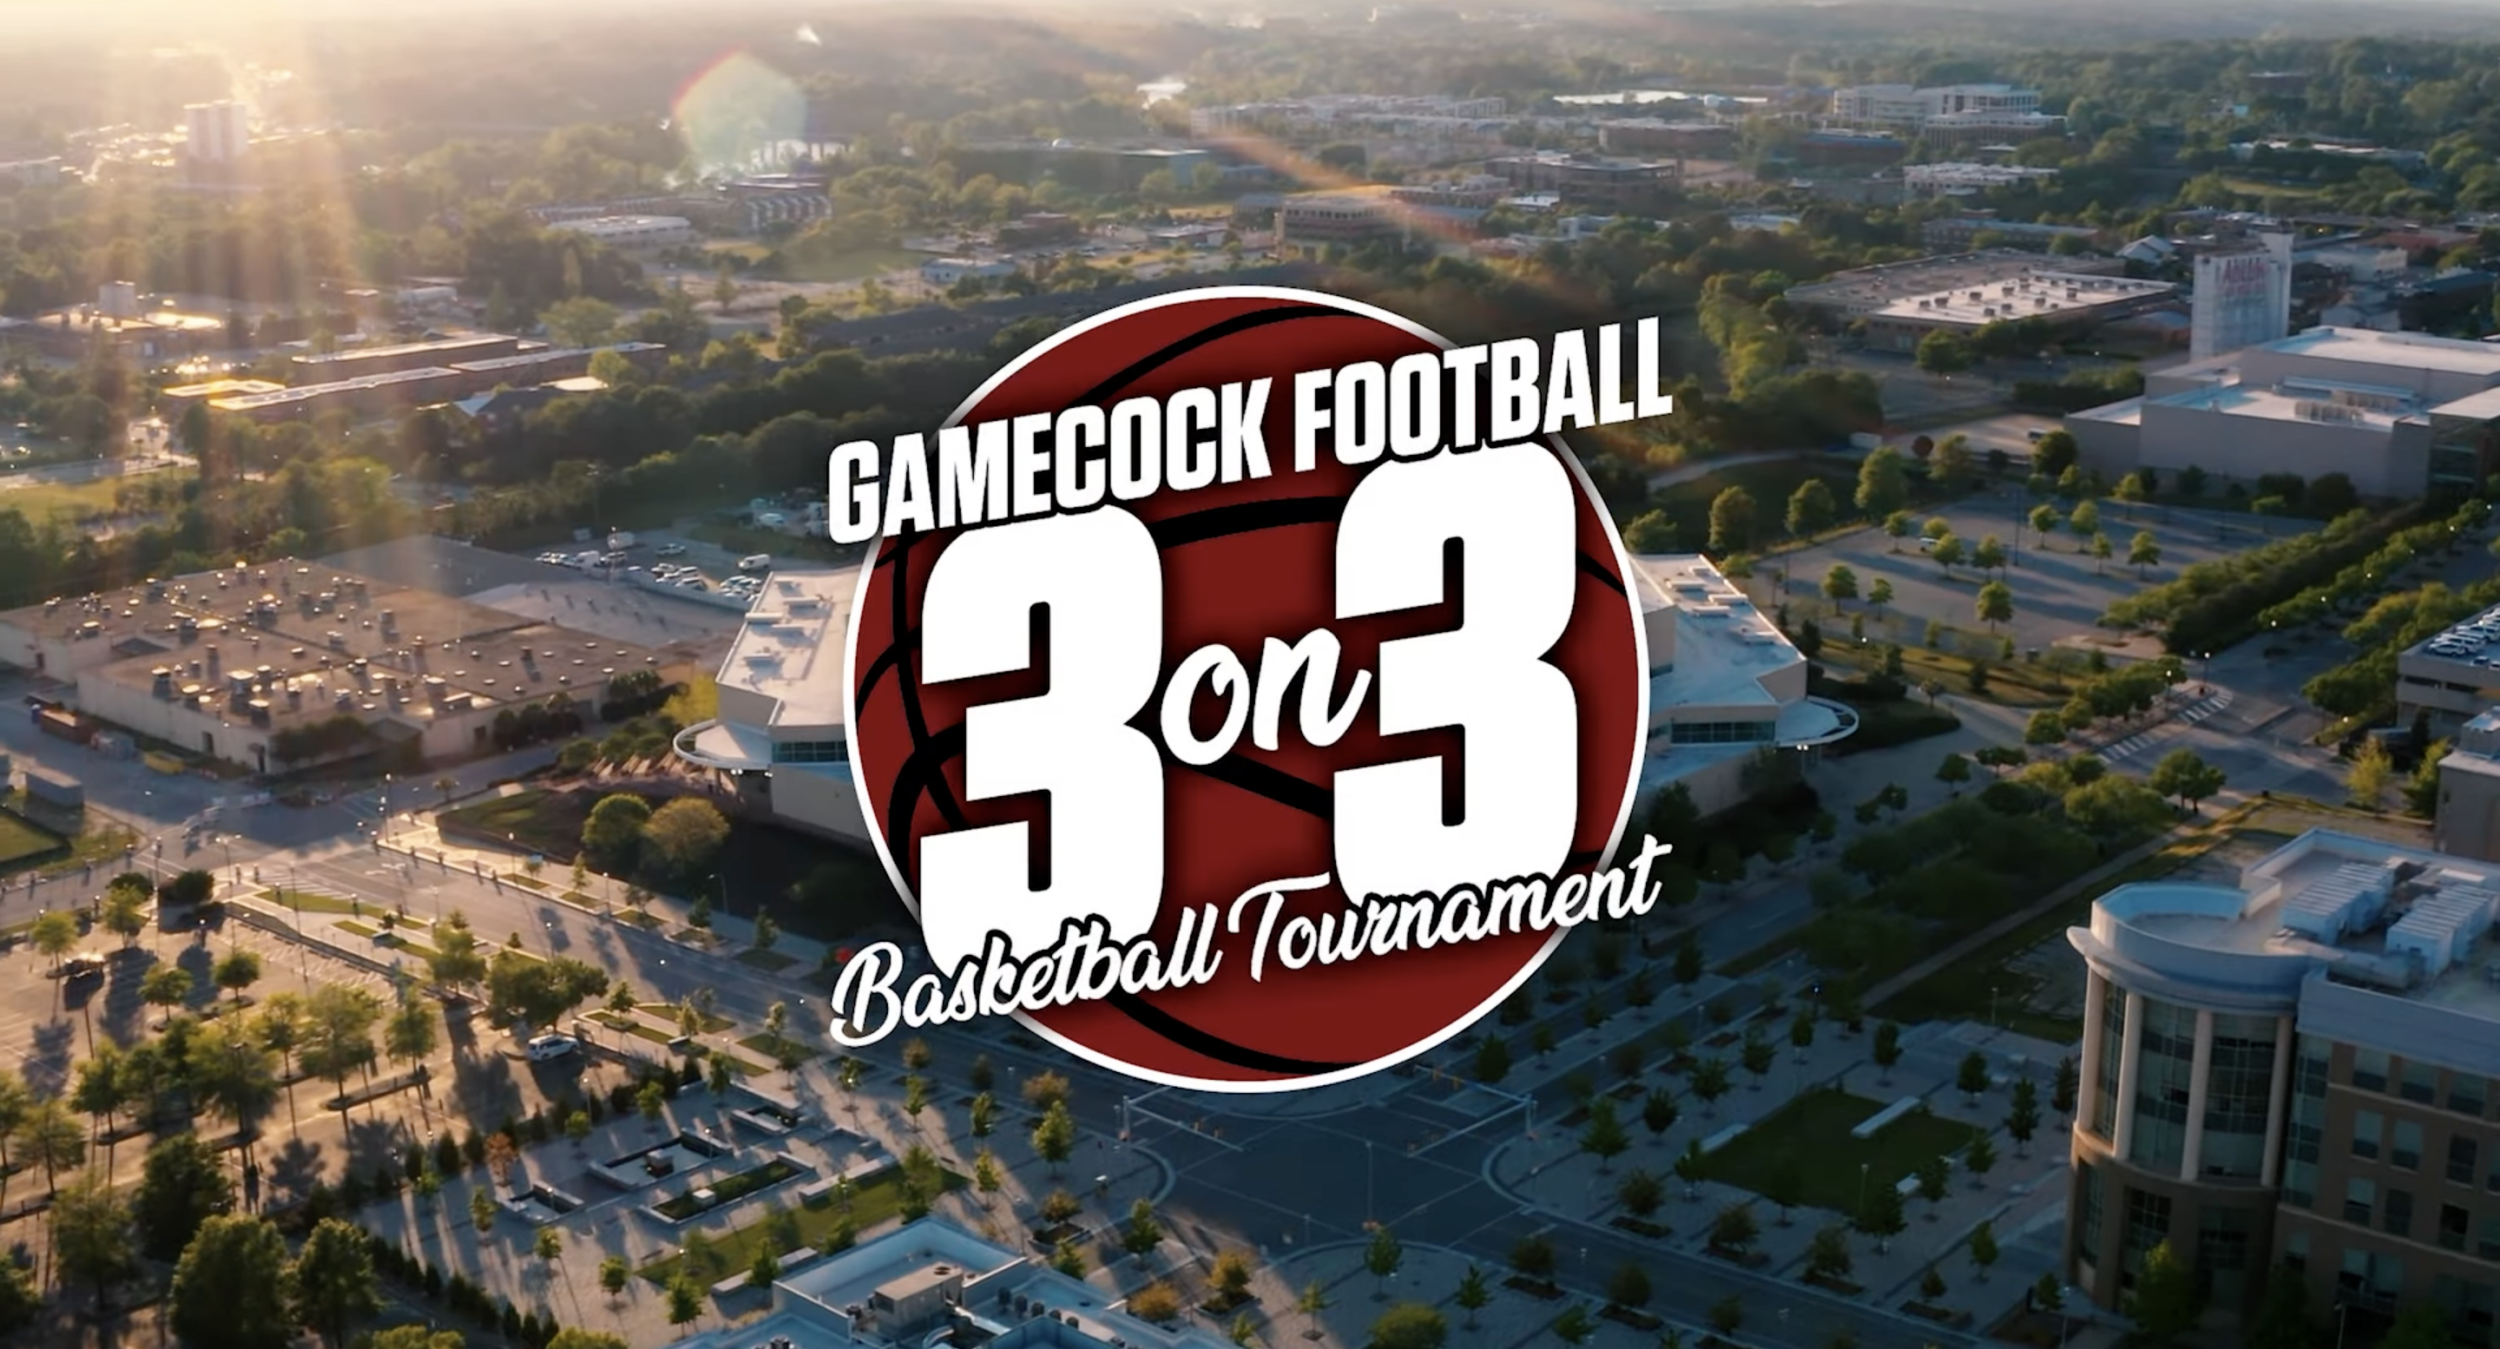 Gamecock Football takes on March Madness